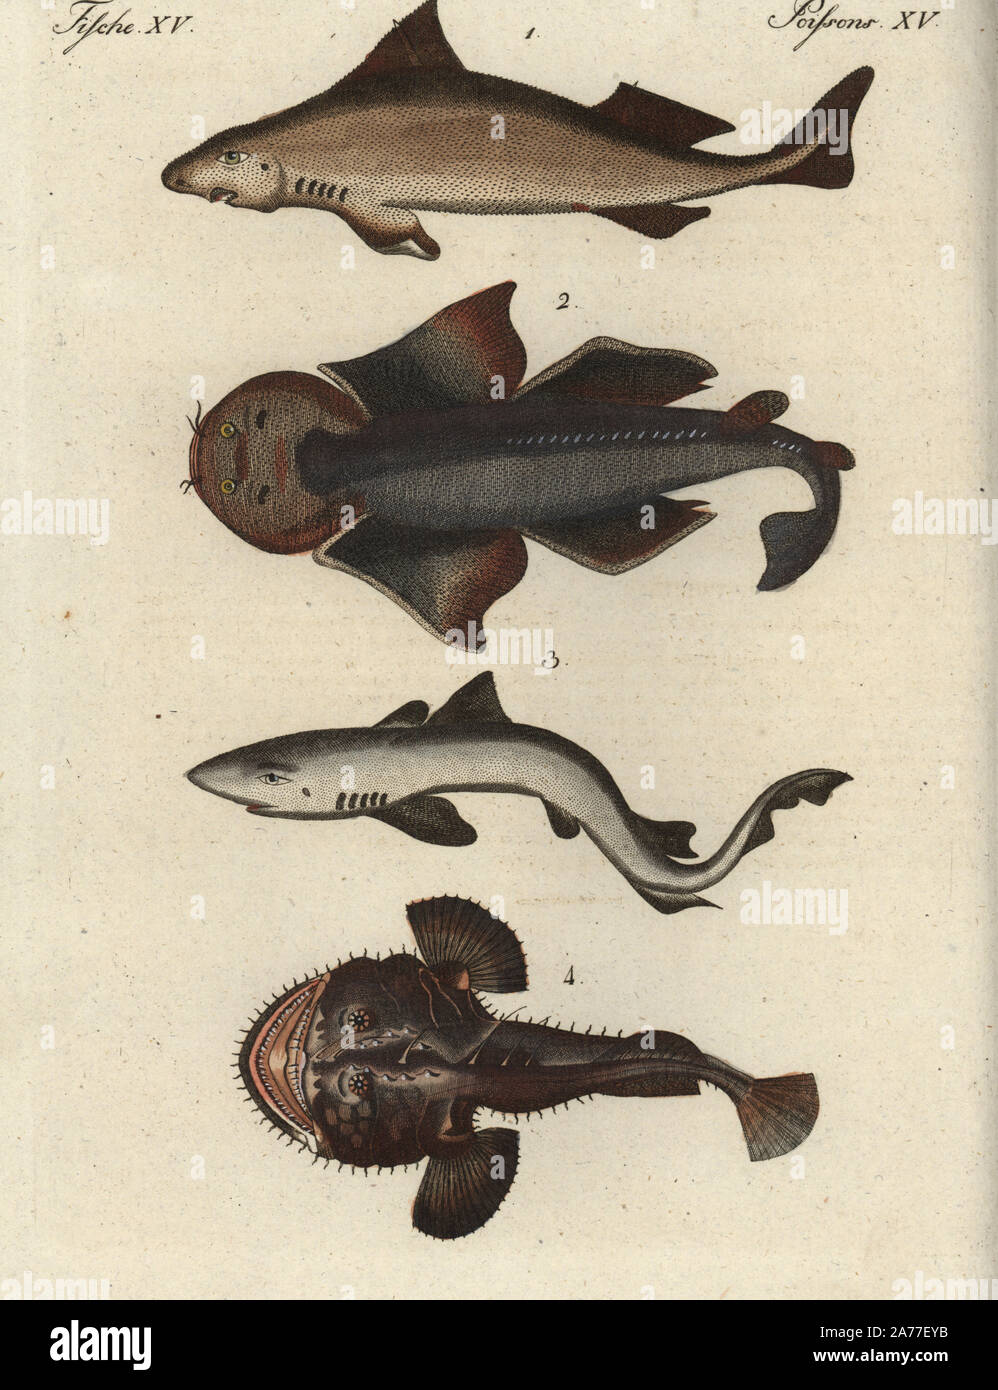 Angular rough shark, Oxynotus centrina 1 (vulnerable), angelshark, Squatina squatina 2 (critically endangered), tope, Galeorhinus galeus 3 (vulnerable), and angler or monkfish, Lophius piscatorius. Handcoloured copperplate engraving from Friedrich Johann Bertuch's Bilderbuch fur Kinder (Picture Book for Children), Weimar, 1795. Stock Photo